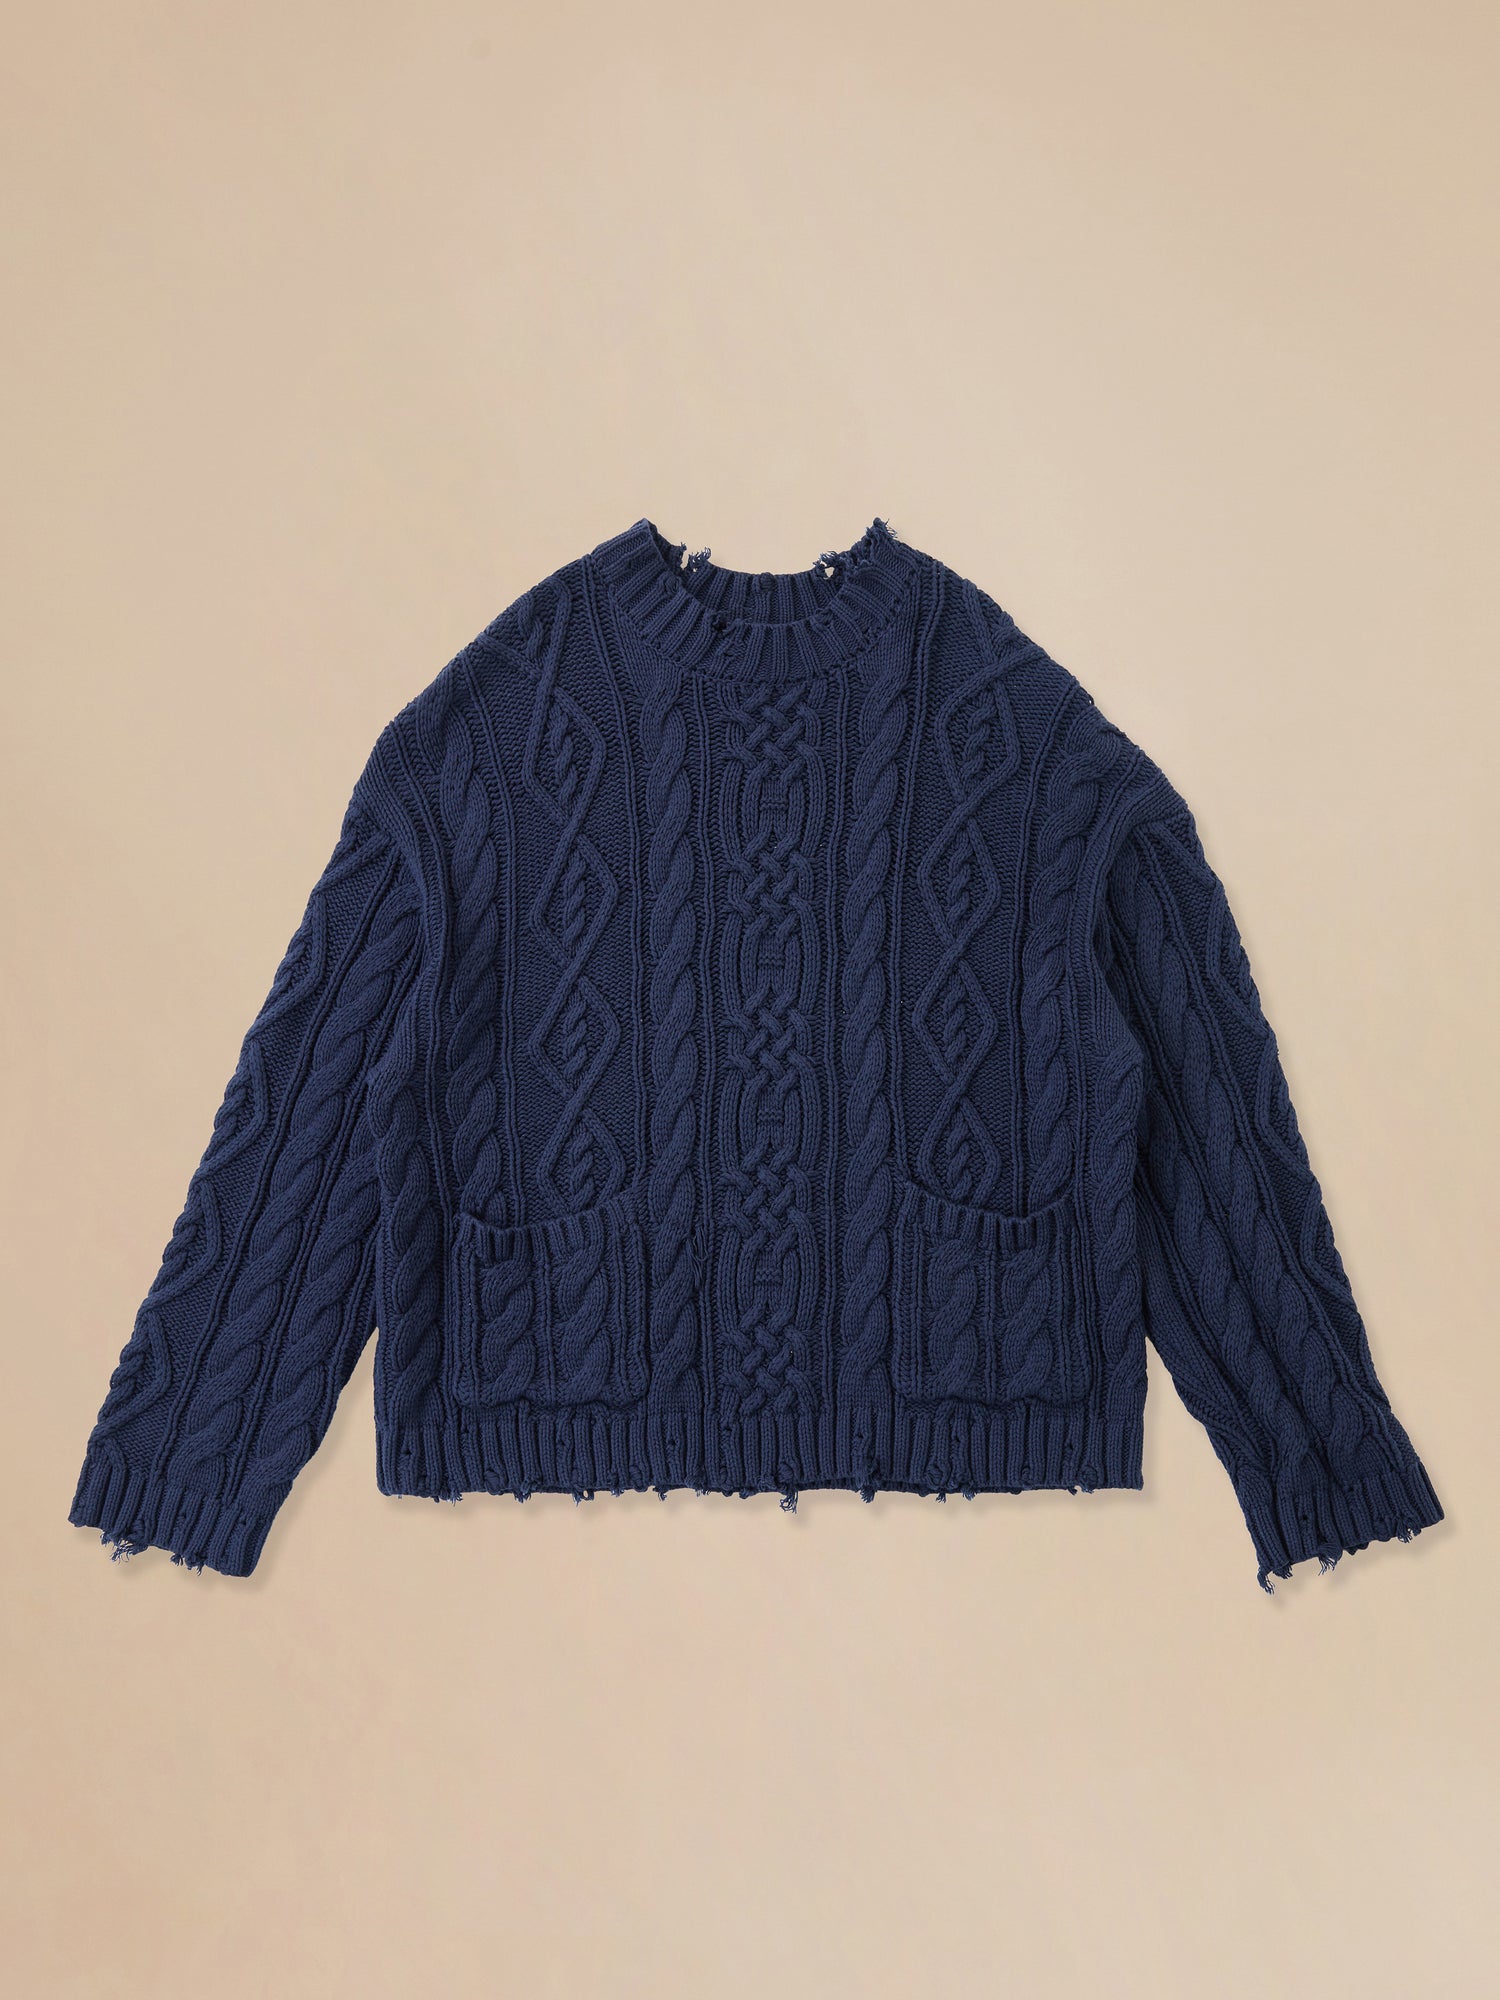 A blue Coming Soon | Astral Distressed Cable Knit Sweater on a beige background by Found.